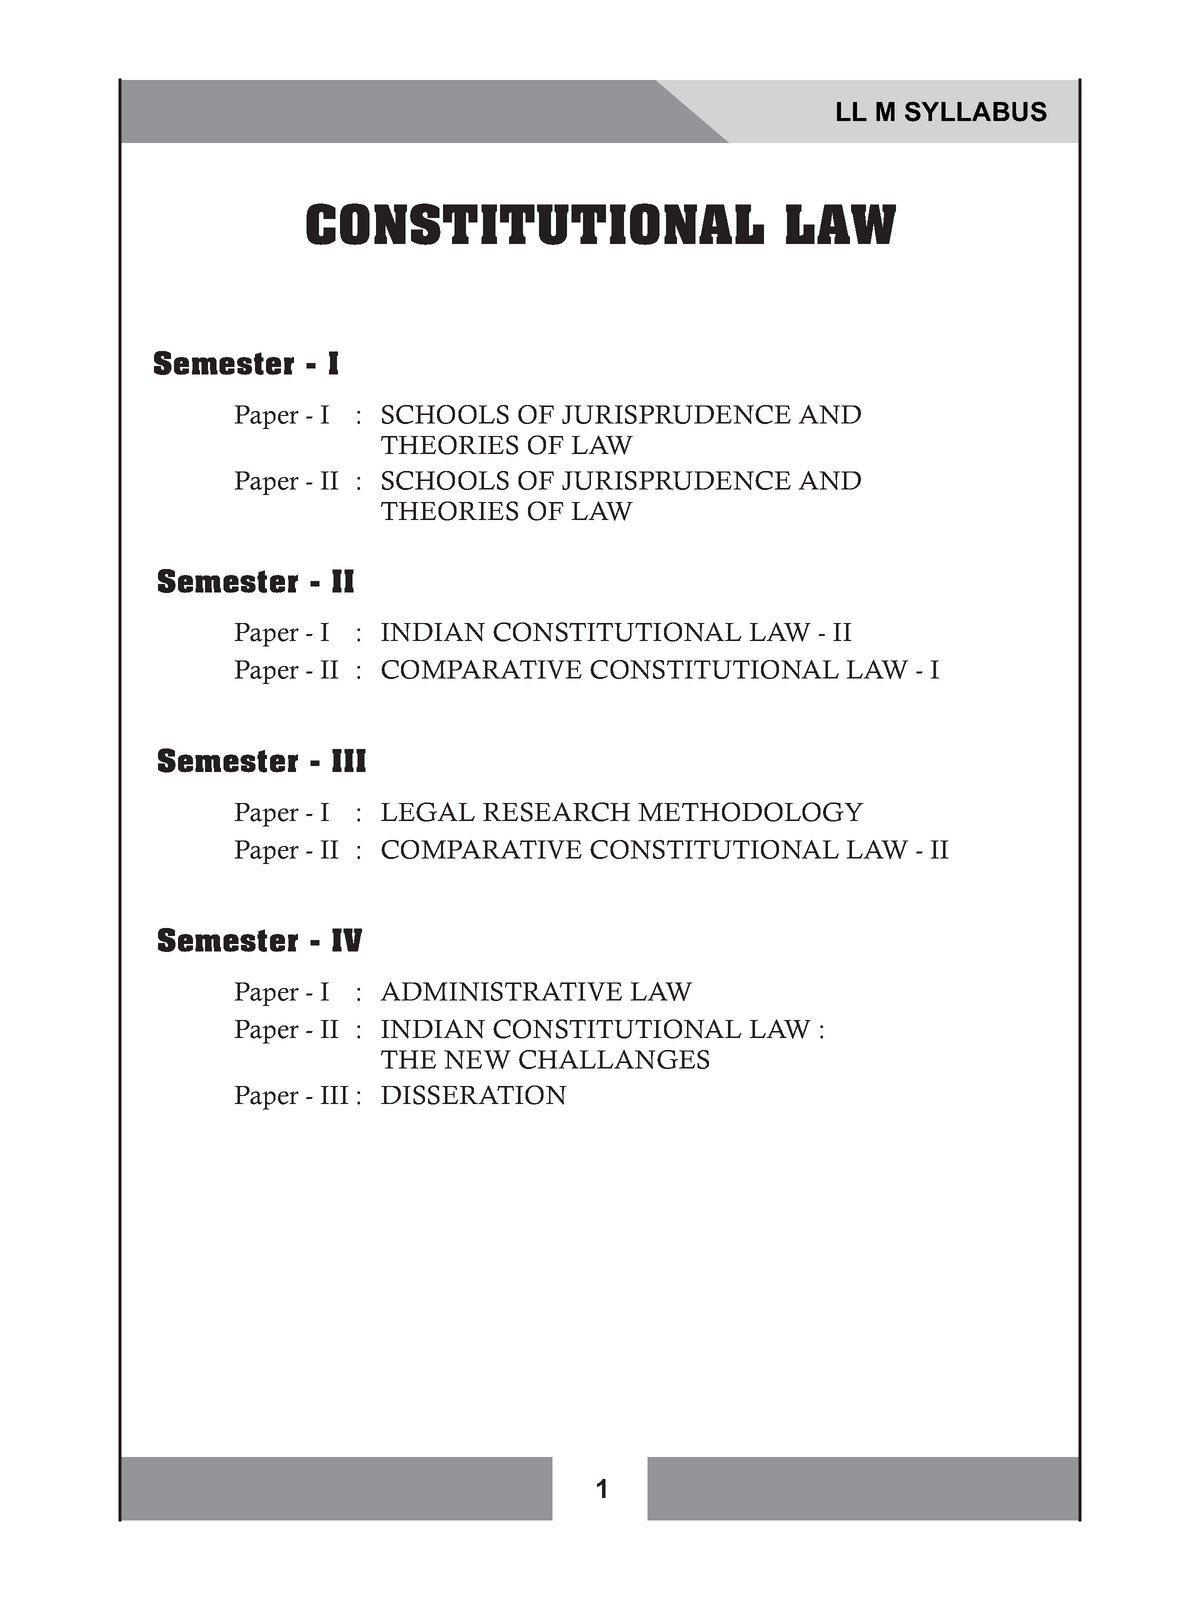 dissertation topics for llm constitutional law